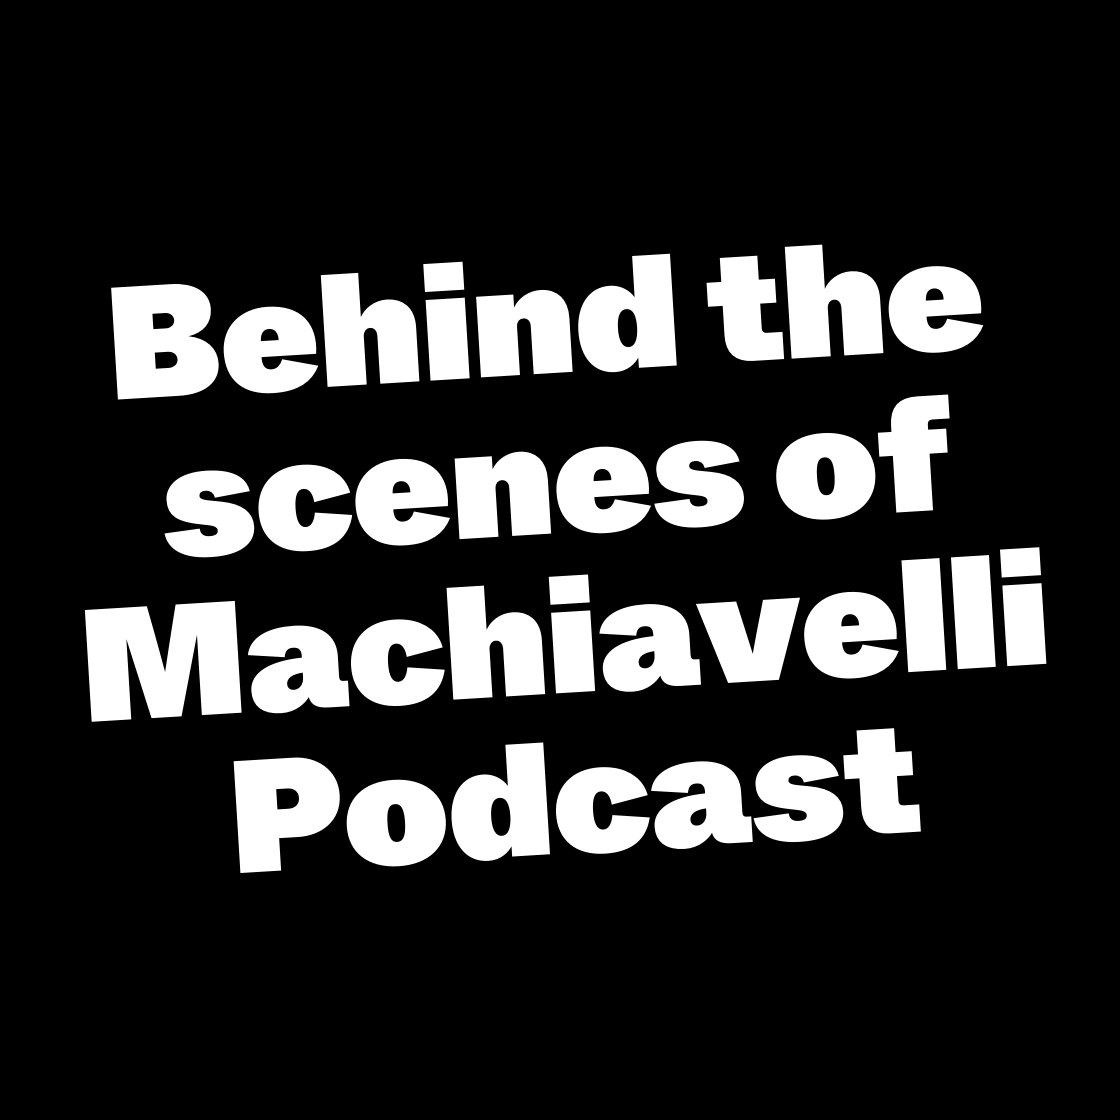 Behind the scenes of Machiavelli Podcast